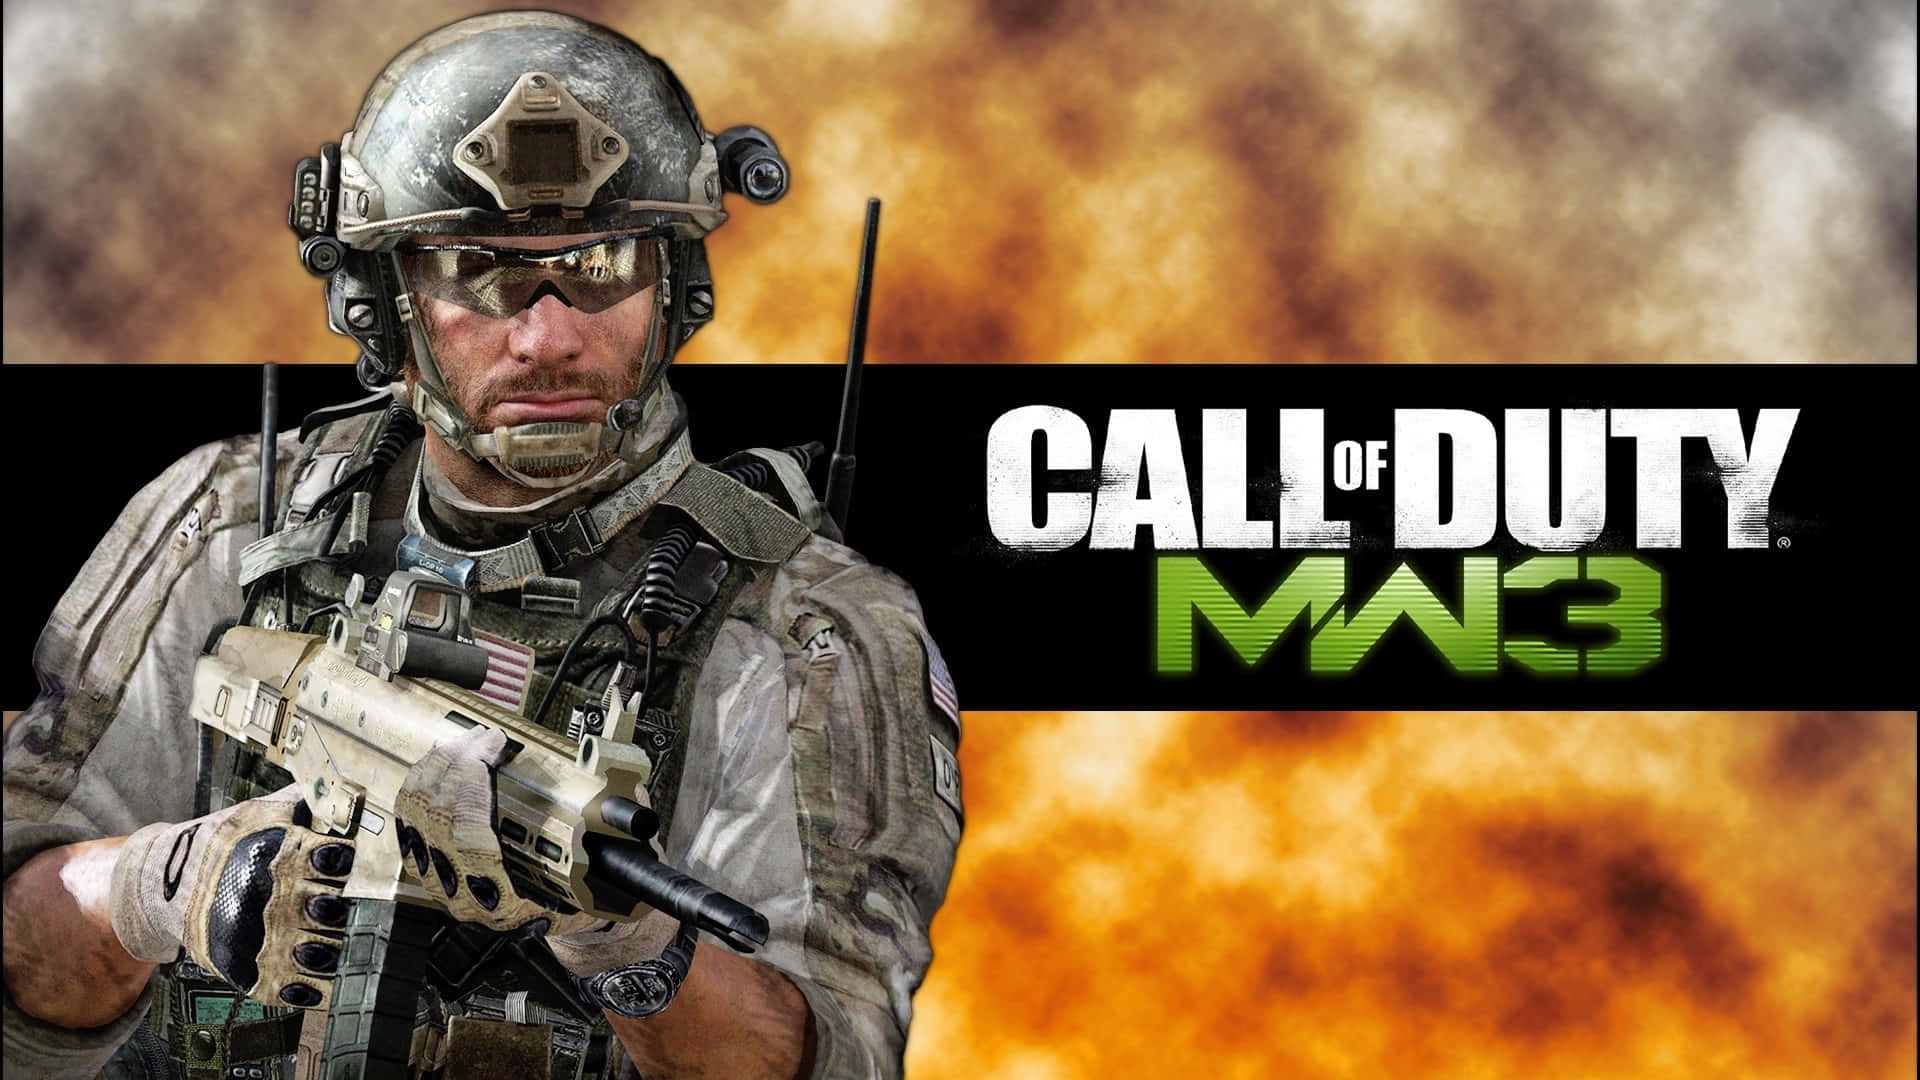 Engage in all-out war with Call Of Duty Modern Warfare HD. Wallpaper